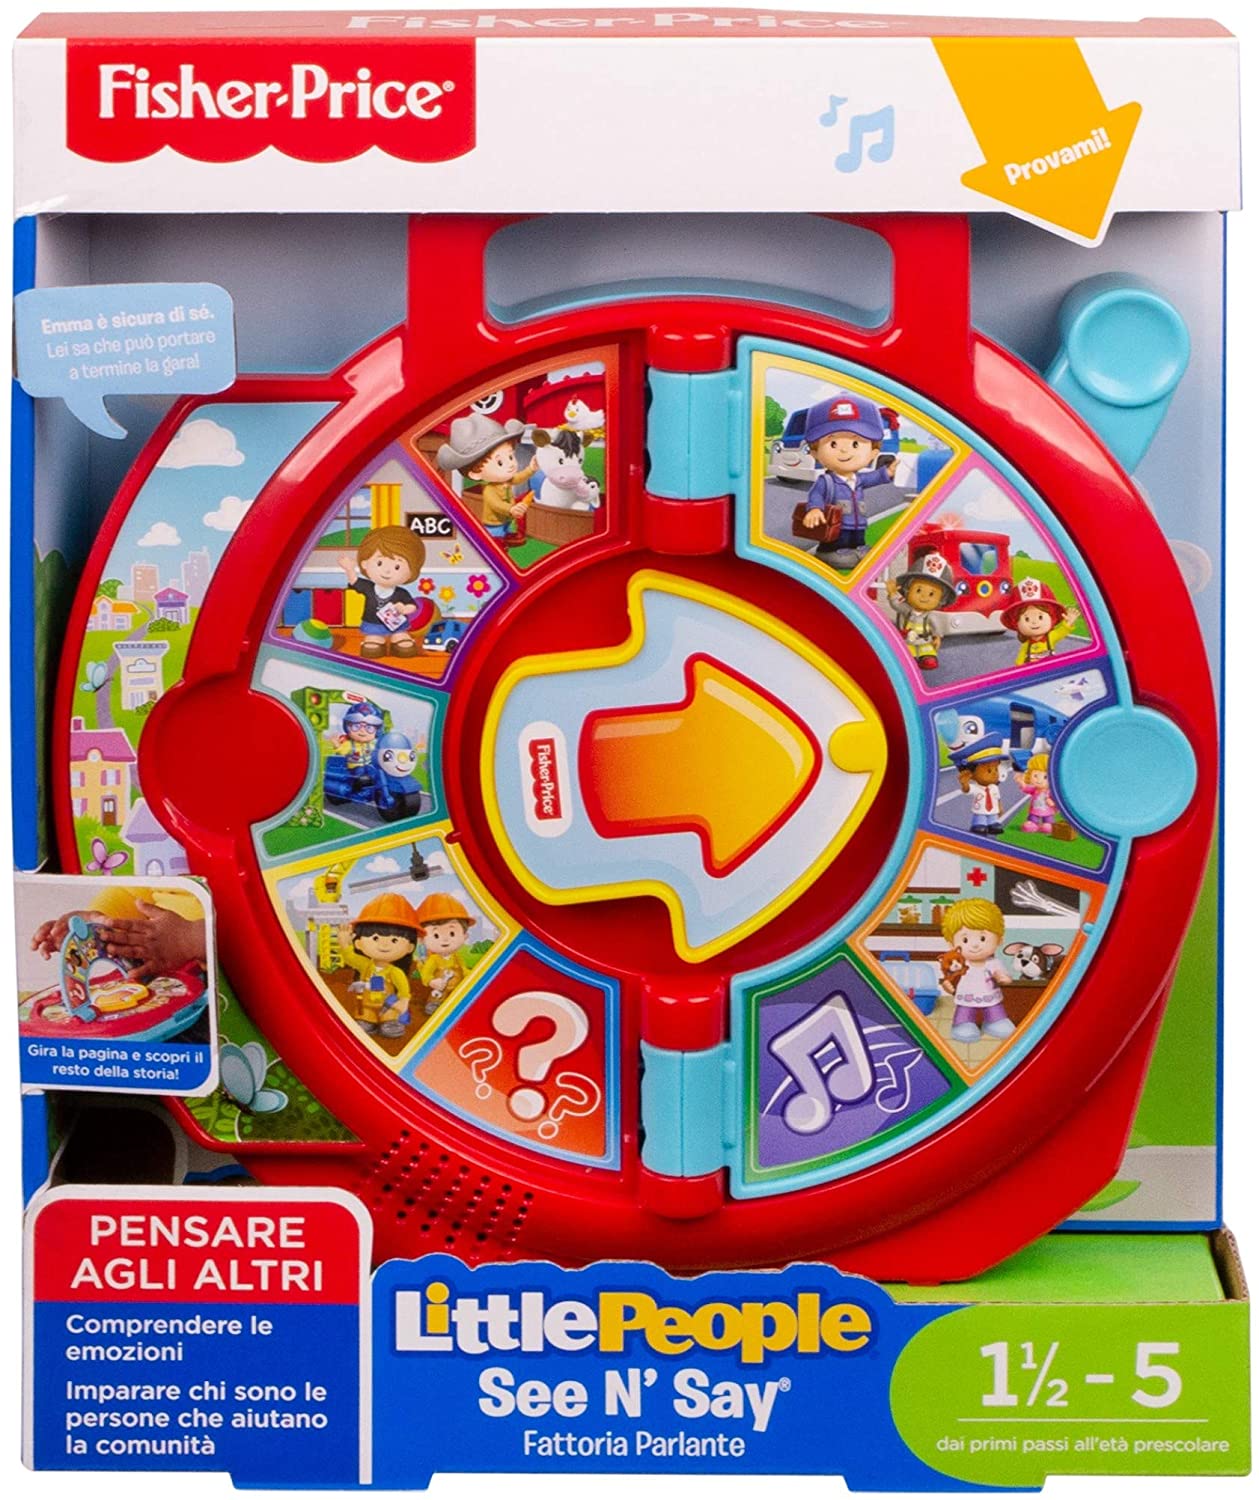 Fisher-Price MATTEL Reden Farm See \'N Say Little People 316